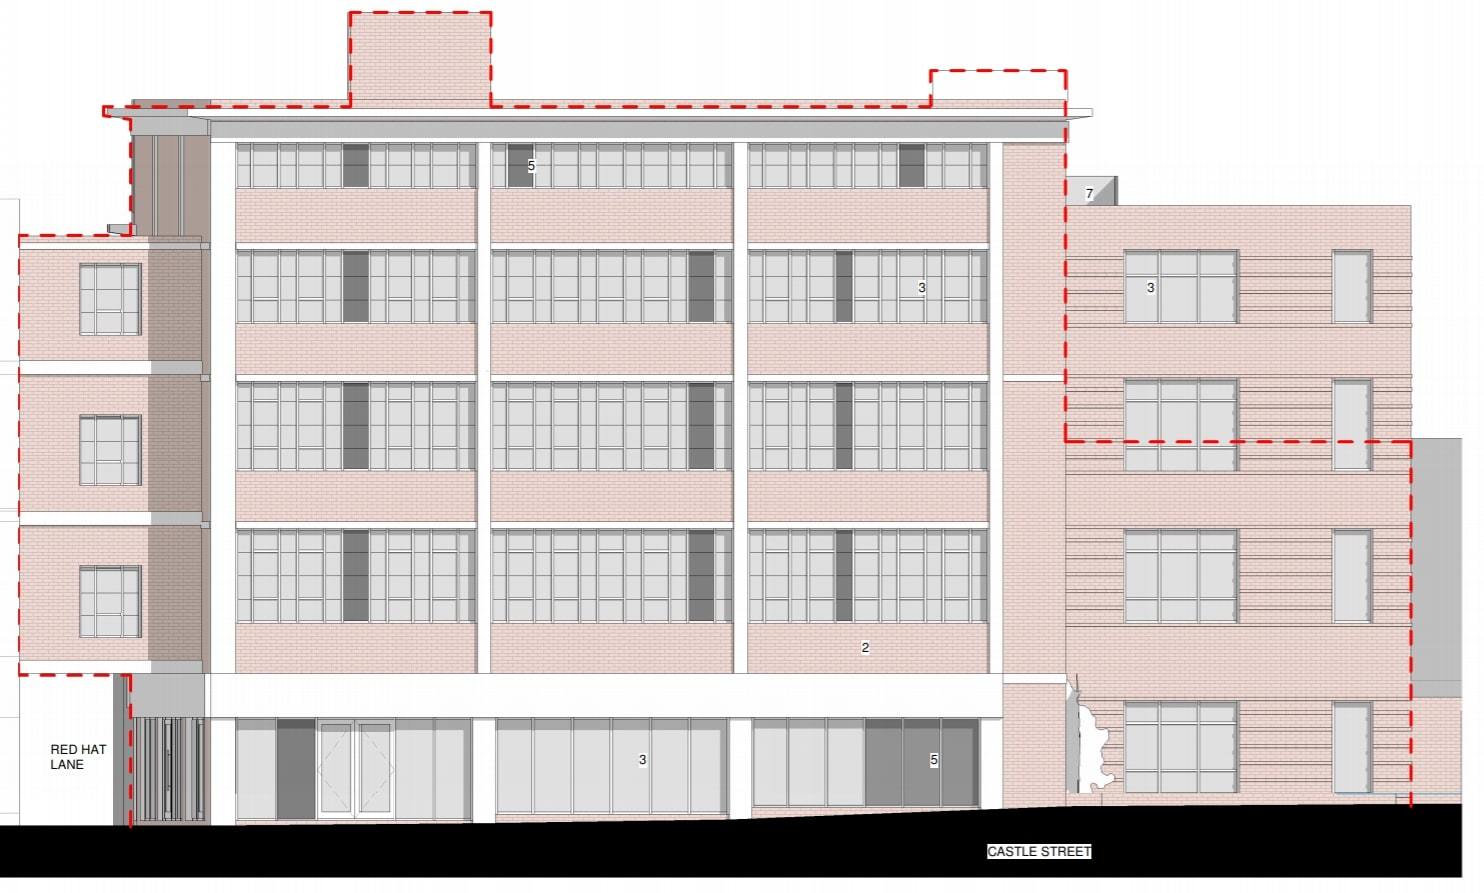 Side elevations for the proposed plans for the former Knees of Trowbridge building